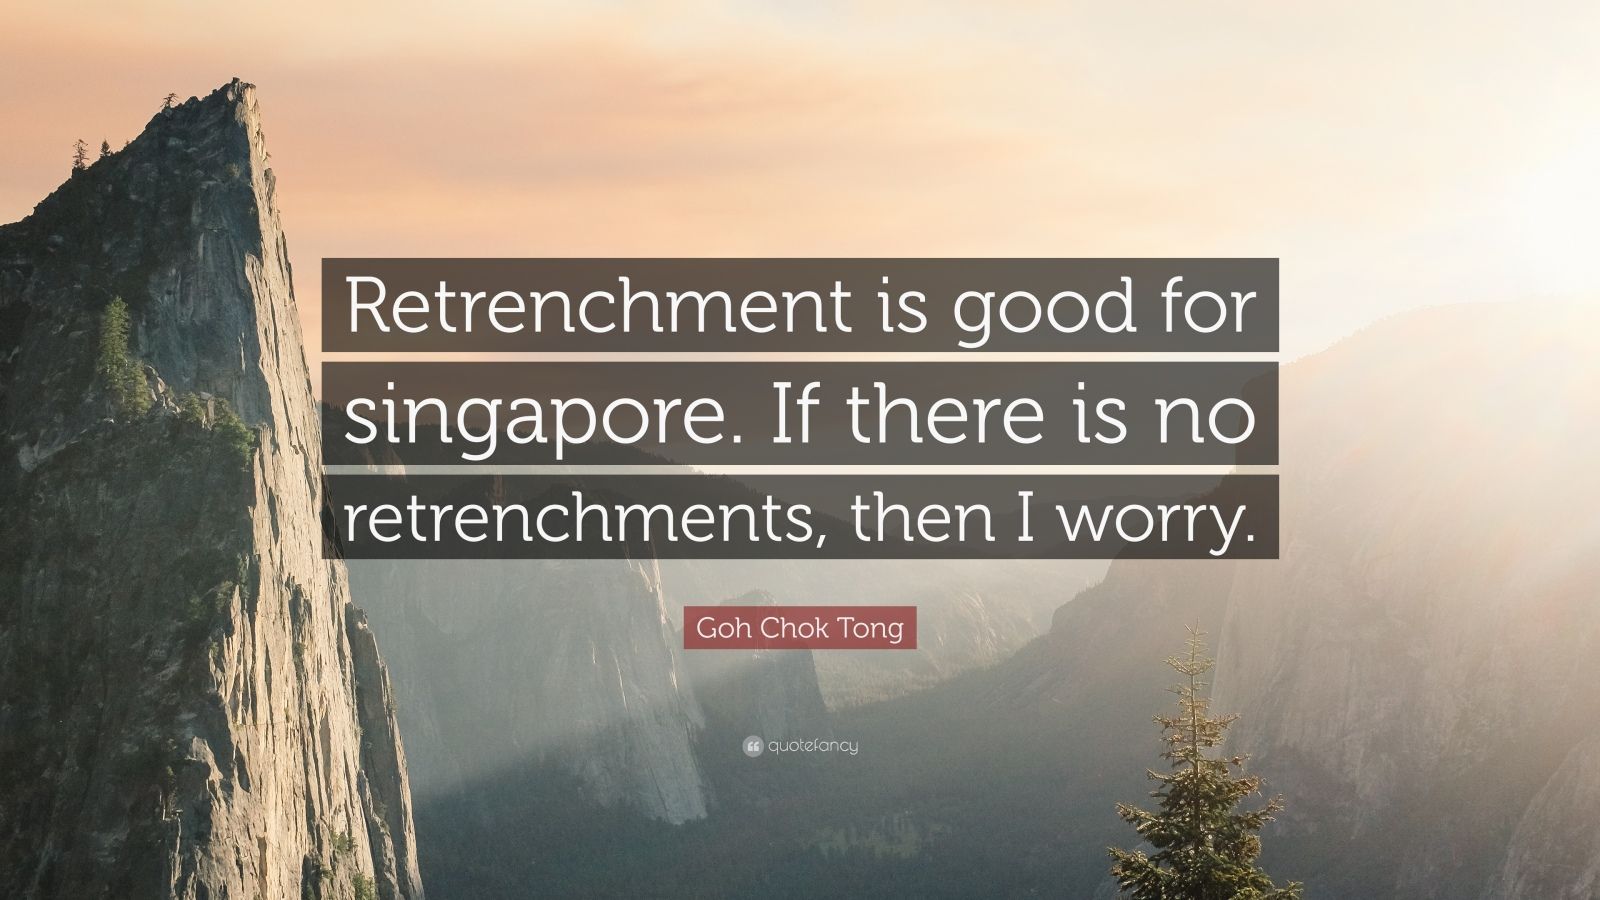 Goh Chok Tong Quote: “Retrenchment is good for singapore. If there is no retrenchments, then I worry.”